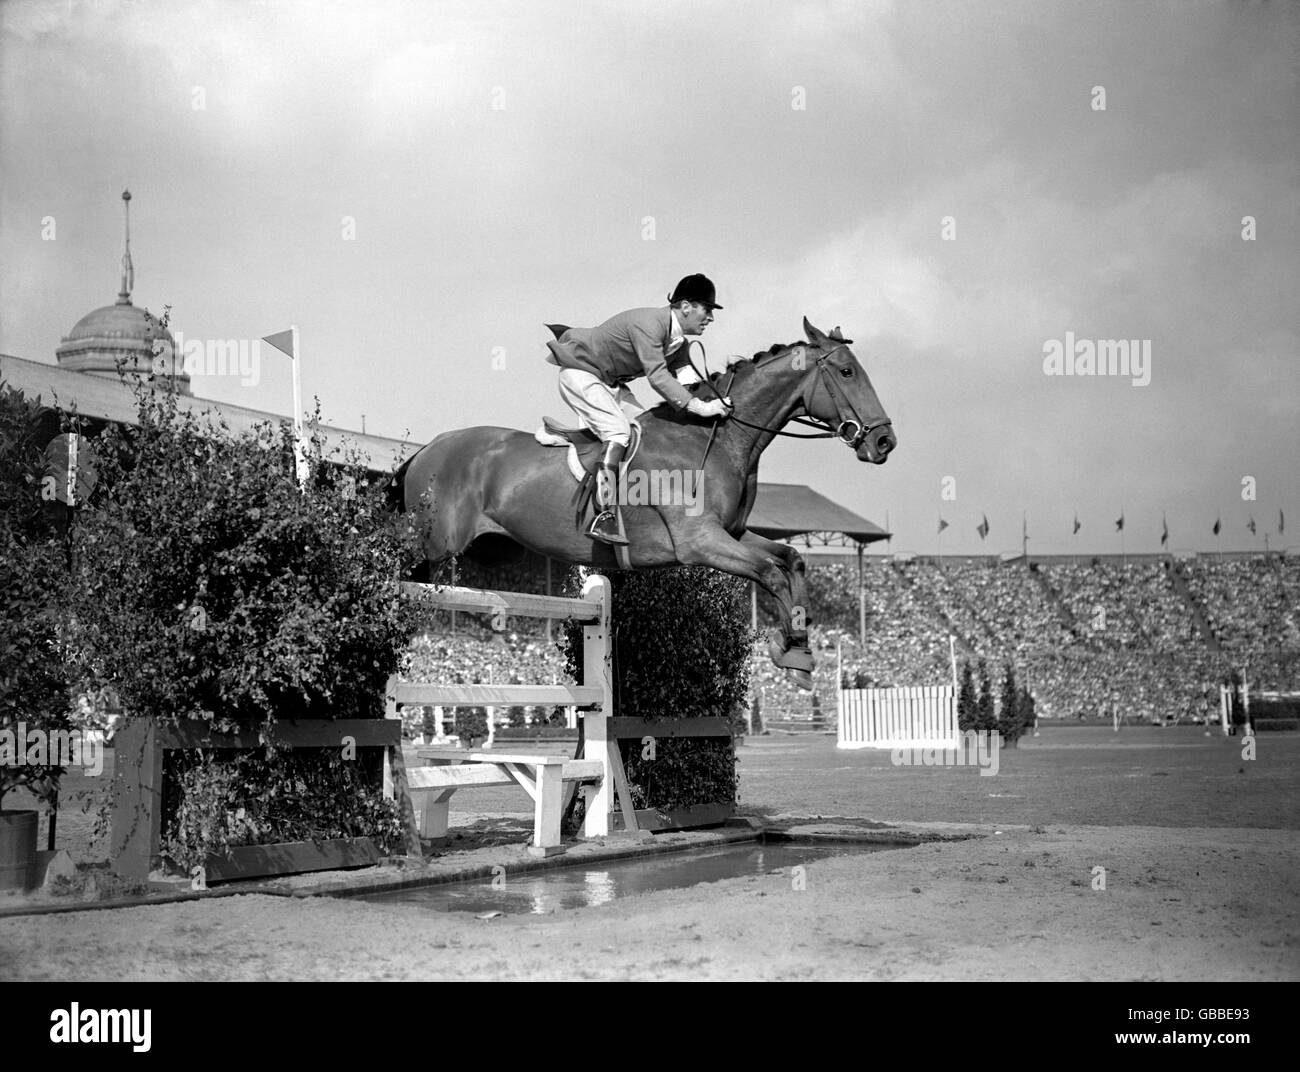 Equestrian - London Olympic Games 1948 - Grand Prix (Jumping). Great Britain's Harry Llewellyn on Foxhunter Stock Photo